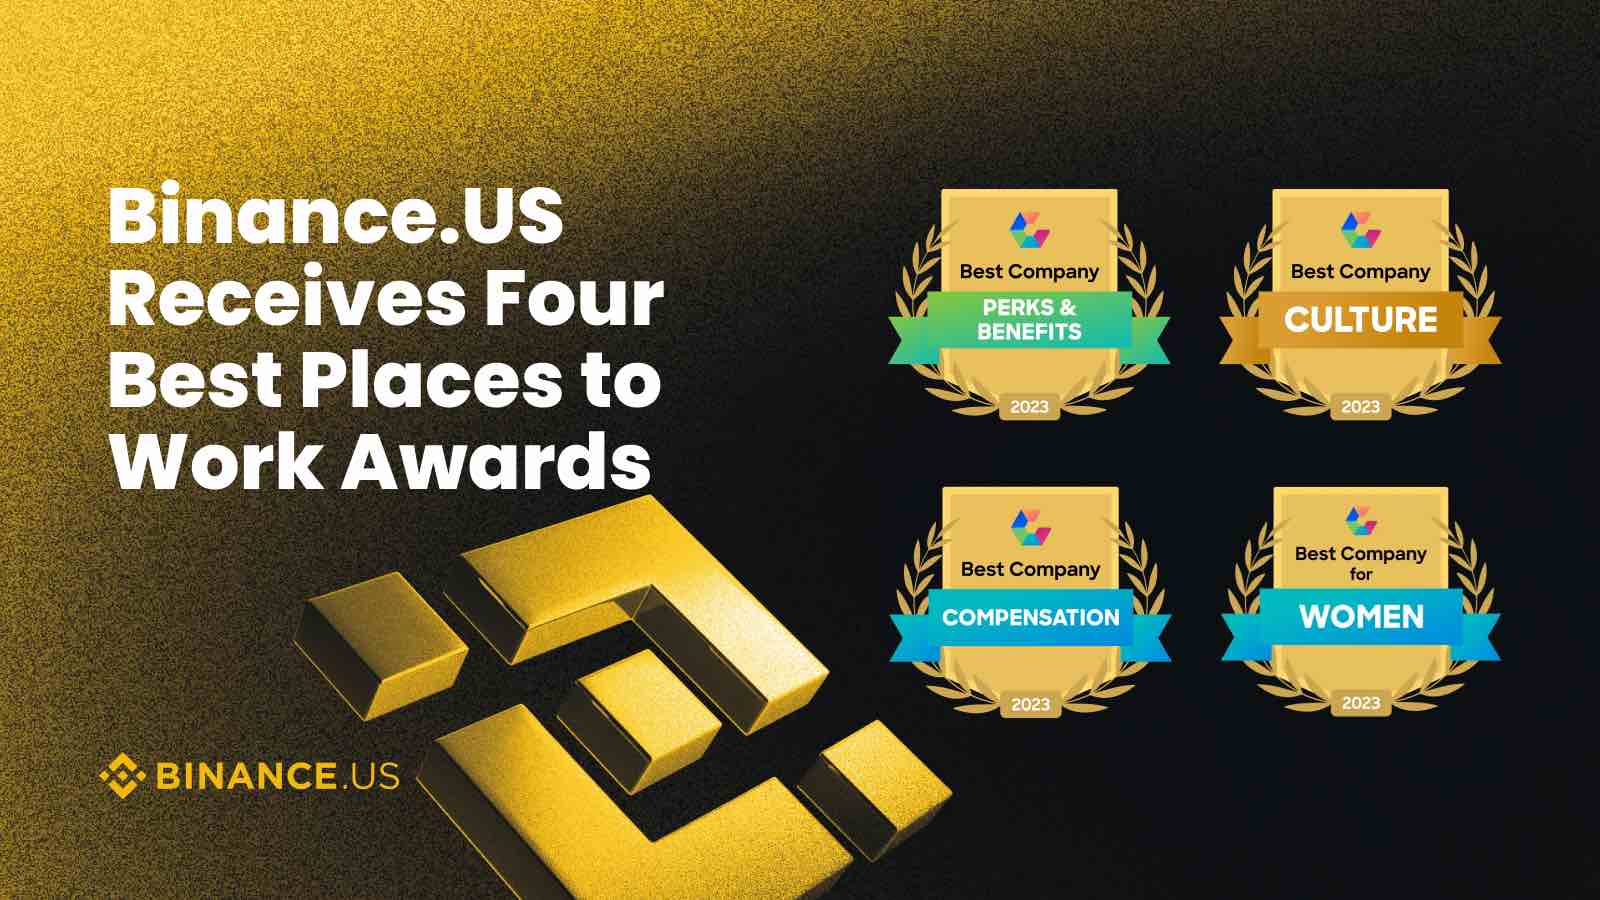 Binance.US Receives Four Comparably Best Places to Work Awards